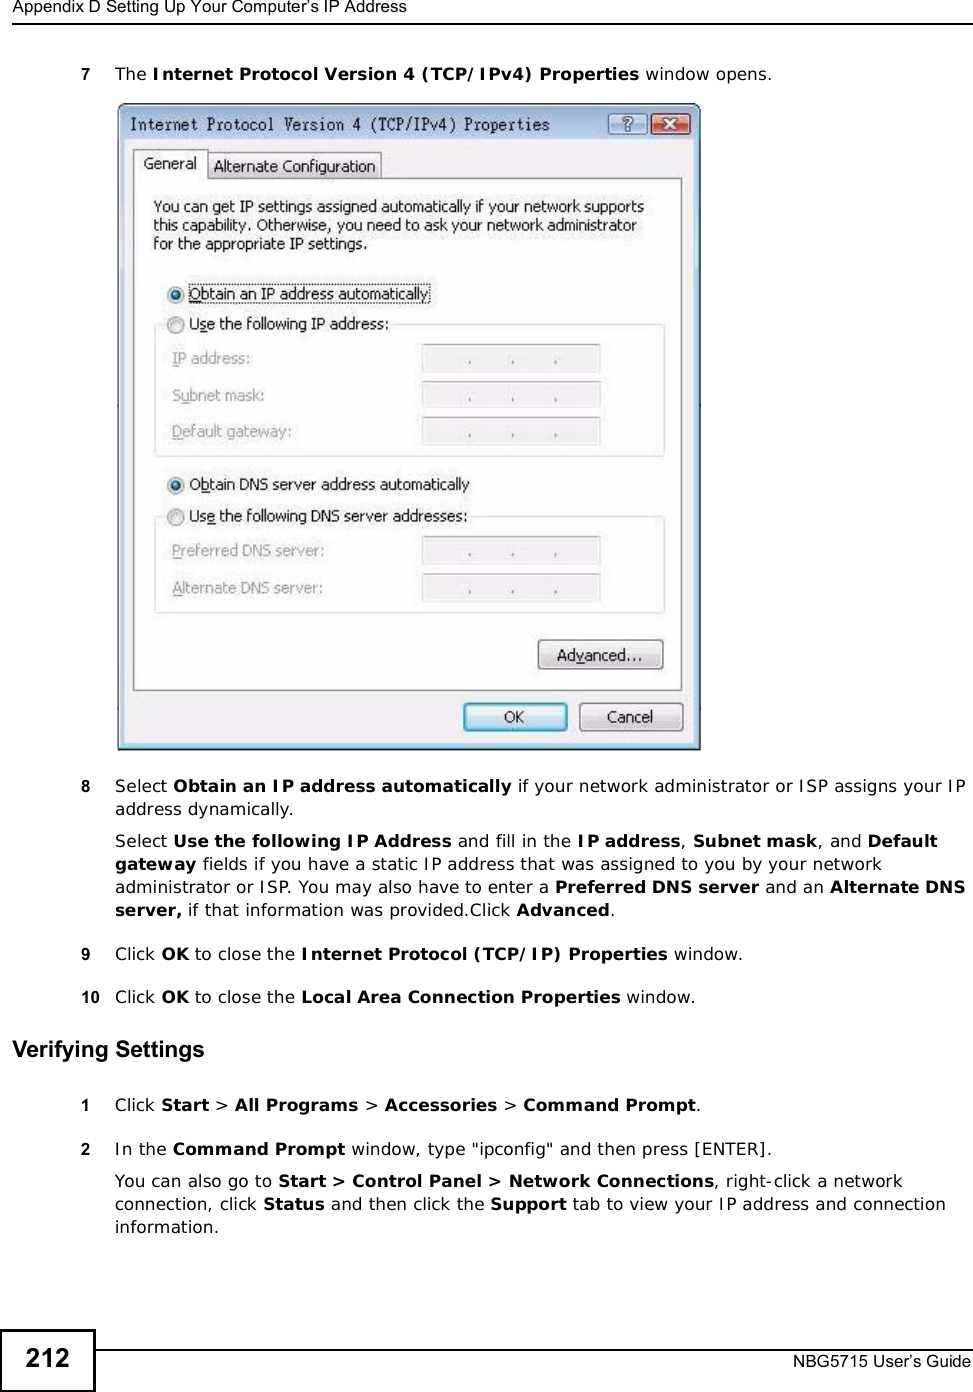 Appendix DSetting Up Your Computer’s IP AddressNBG5715 User’s Guide2127The Internet Protocol Version 4 (TCP/IPv4) Properties window opens.8Select Obtain an IP address automatically if your network administrator or ISP assigns your IP address dynamically.Select Use the following IP Address and fill in the IP address,Subnet mask, and Default gateway fields if you have a static IP address that was assigned to you by your network administrator or ISP. You may also have to enter a Preferred DNS server and an AlternateDNSserver, if that information was provided.Click Advanced.9Click OK to close the Internet Protocol (TCP/IP) Properties window.10 Click OK to close the Local Area Connection Properties window.Verifying Settings1Click Start &gt; All Programs &gt; Accessories &gt; Command Prompt.2In the Command Prompt window, type &quot;ipconfig&quot; and then press [ENTER]. You can also go to Start &gt; Control Panel &gt; Network Connections, right-click a network connection, click Status and then click the Support tab to view your IP address and connection information.